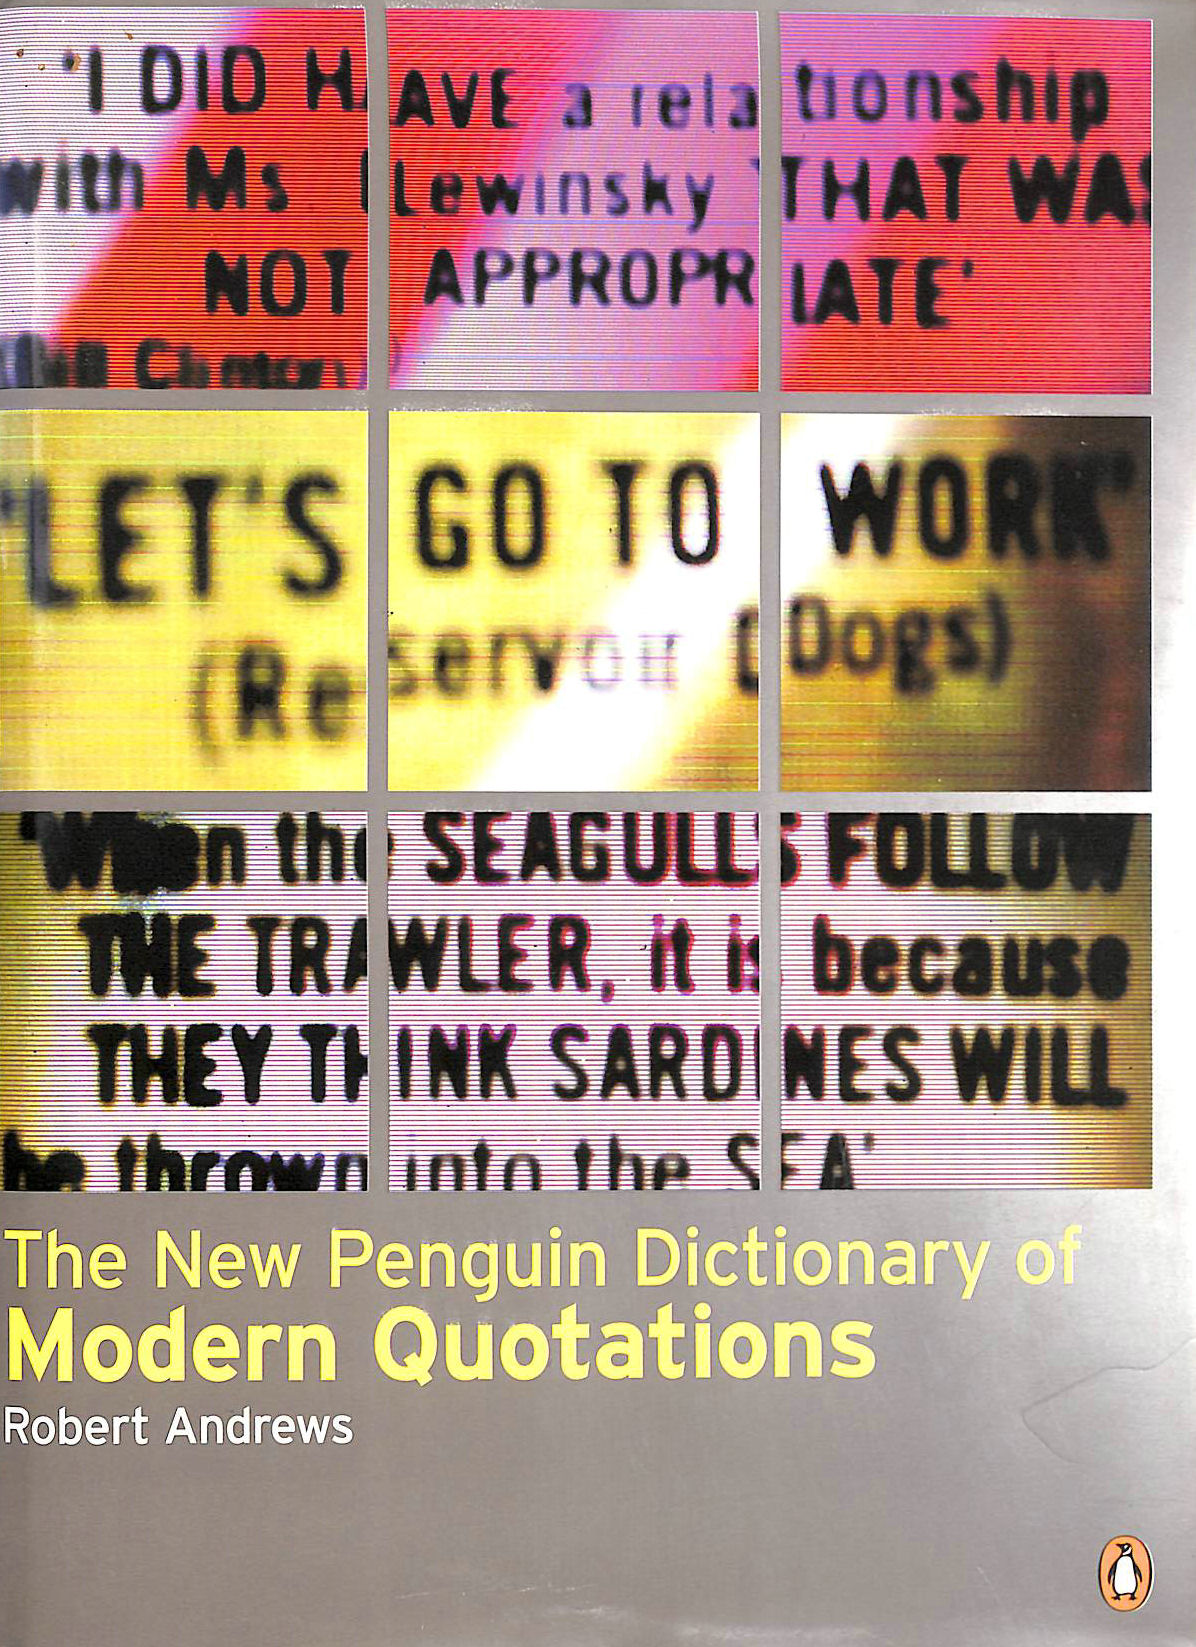 ANDREWS, ROBERT - The New Penguin Dictionary of Modern Quotations